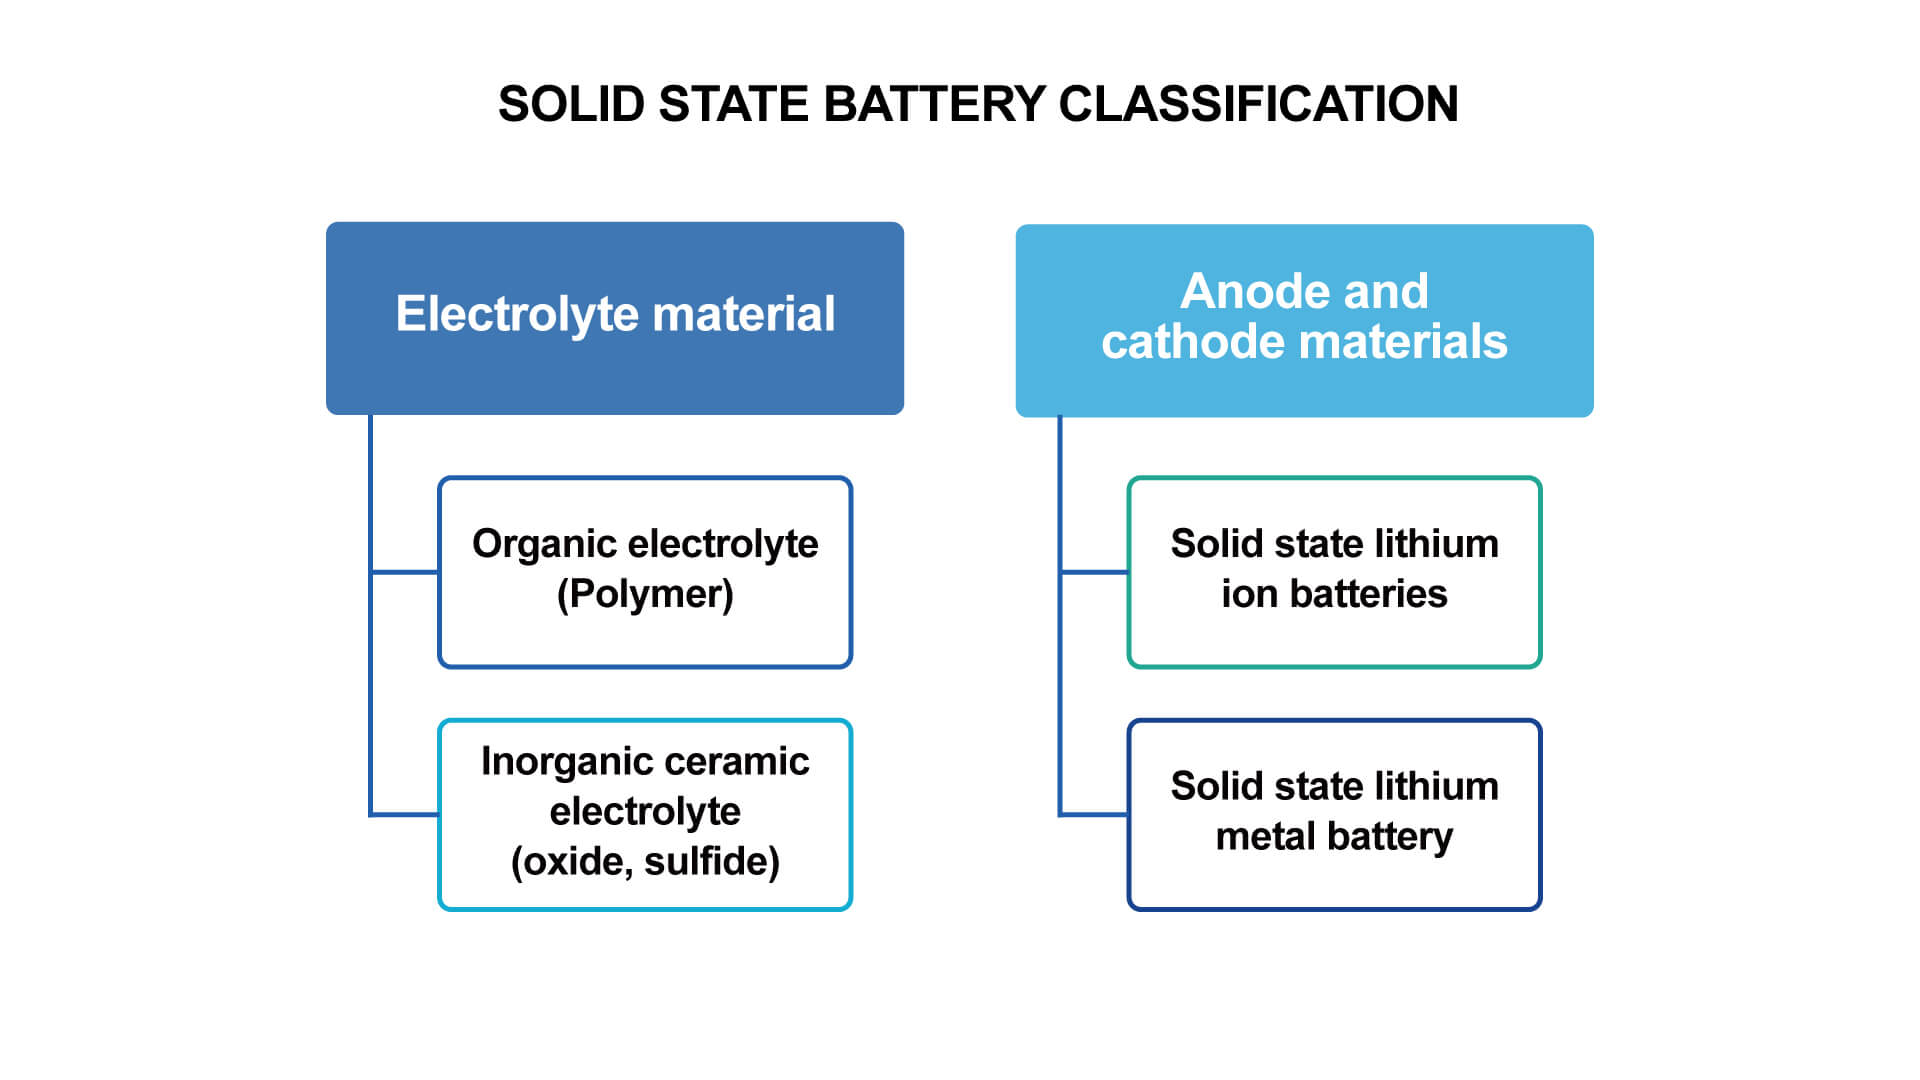 Classification of solid state batteries